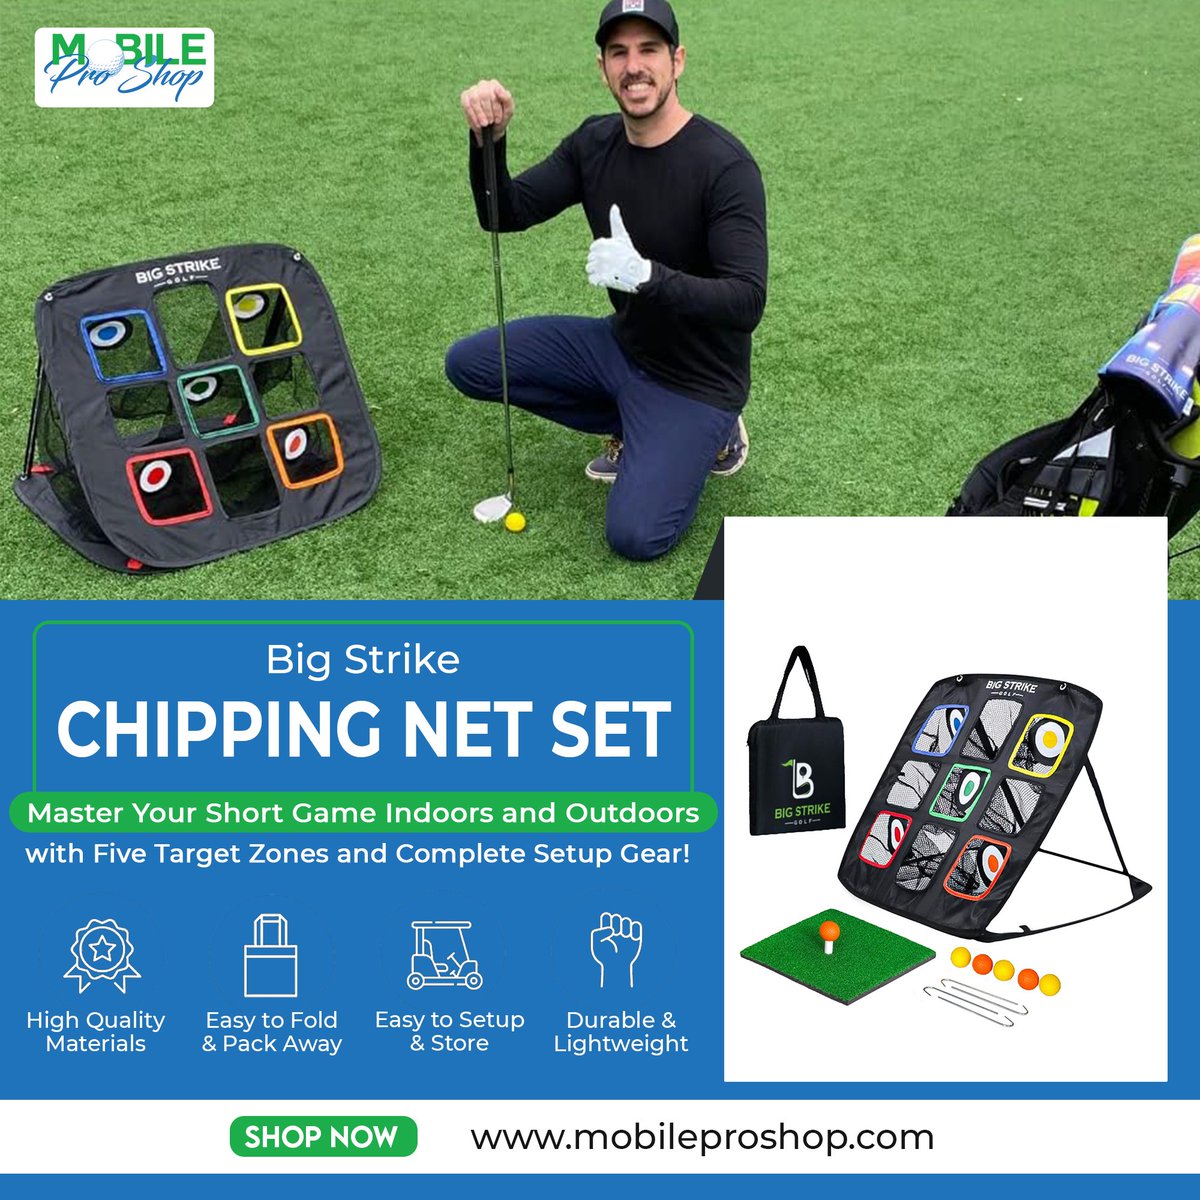 Big Strike Chipping Net Set  Master Your Short Game Indoors and Outdoors with Four colored Target Zones and Complete Setup Gear!

#BigStrikeGolf #ChippingNet #GolfTraining #IndoorOutdoor #PrecisionPractice #GolfGear #TargetZones #ElevateYourGame #GolfTrainingAids